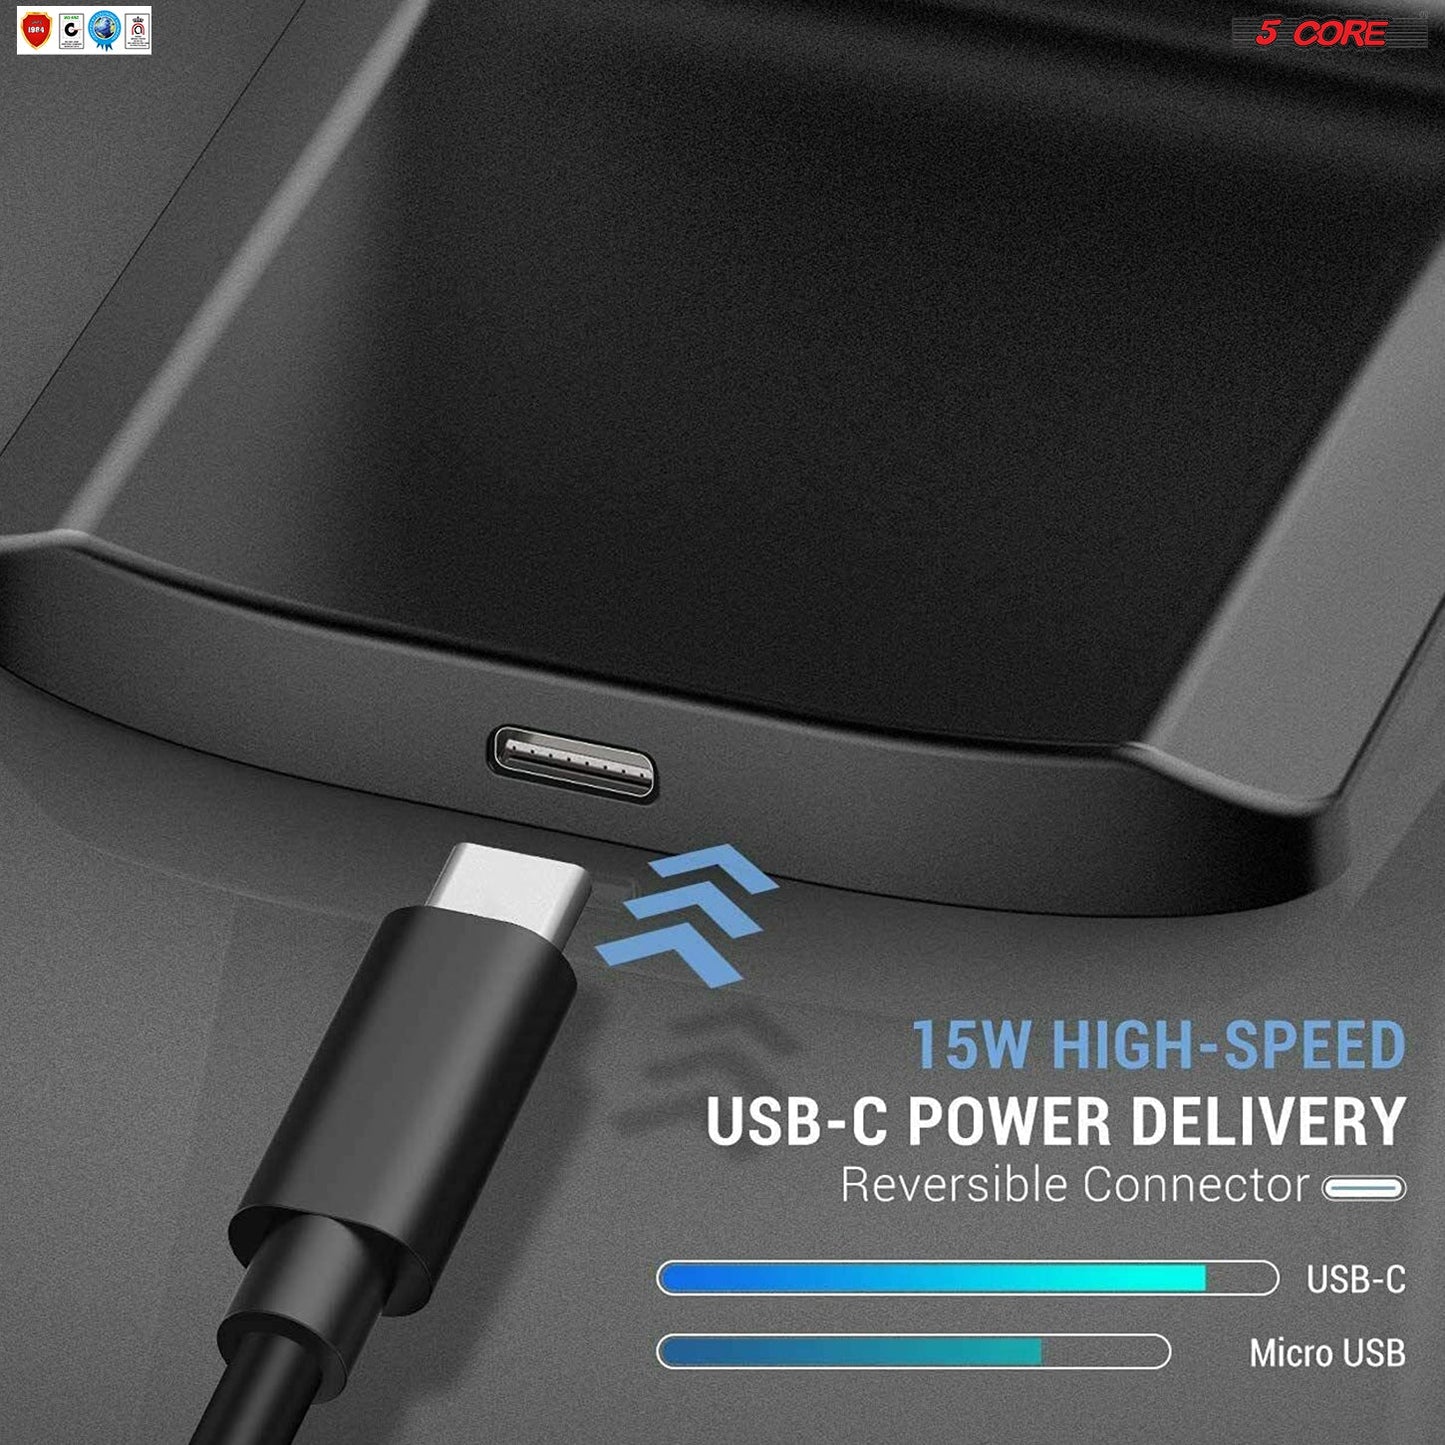 5 Core Magsafe Charger 1 Piece Black Portable Wireless Charging Station Fast Phone Charger Stand w Sleep Friendly LED 2 Charging Coil Samsumg iPhone Wireless Fast Charging Stand - 10W Black-2